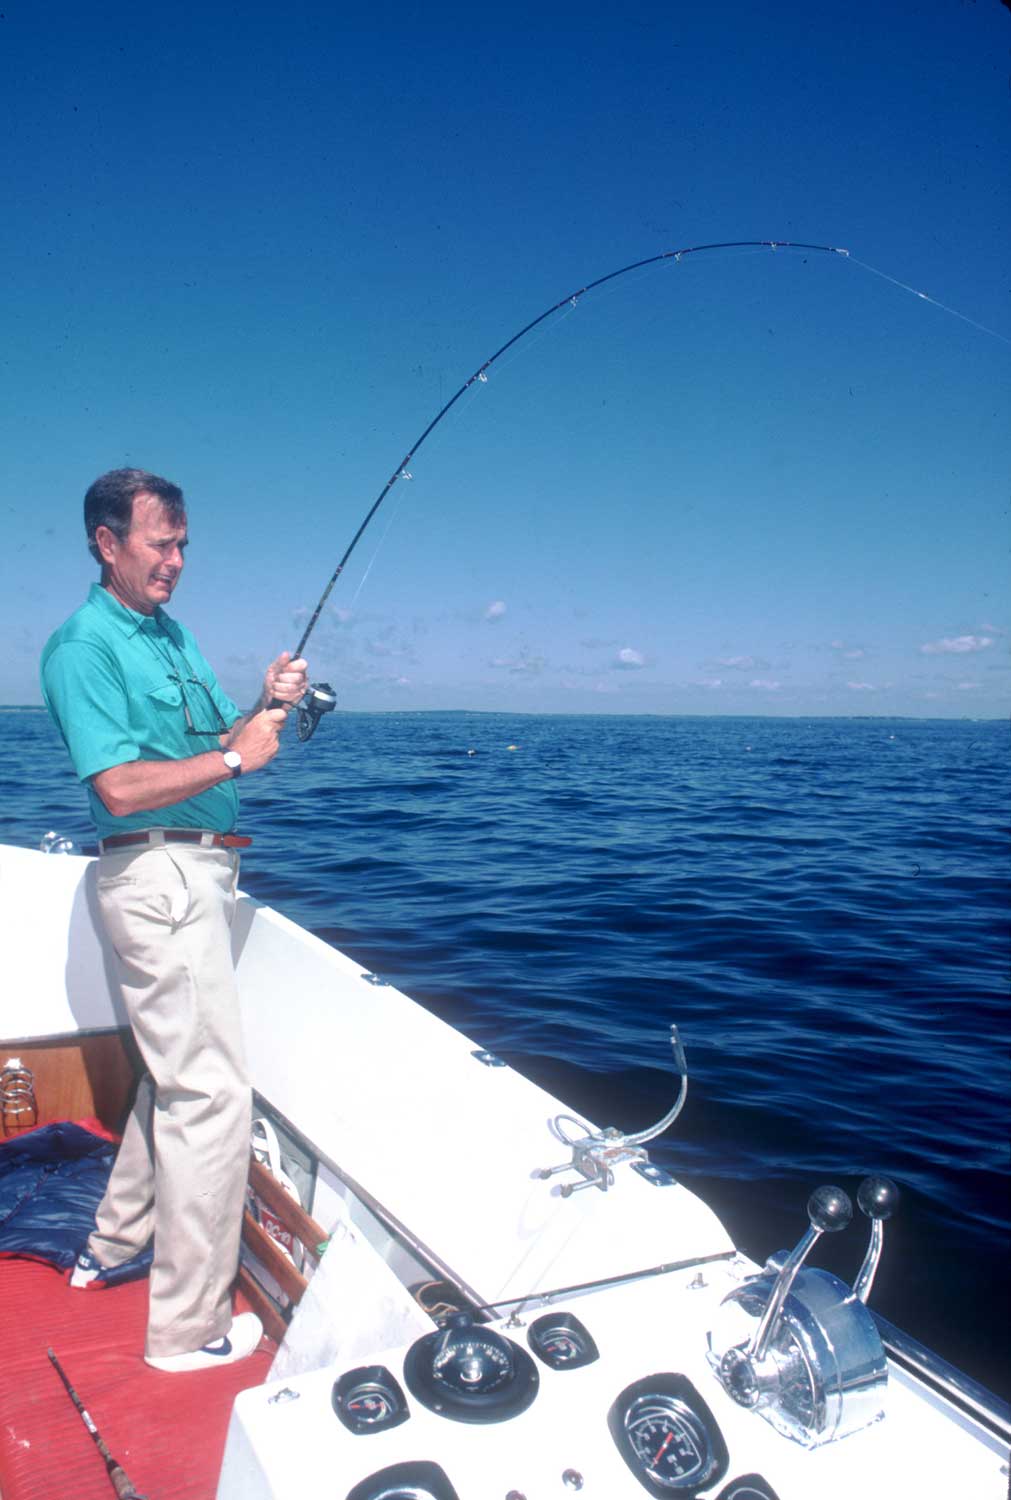 Vice President George Bush tries to catch a fish August 1983 in Kennebunkport, ME.